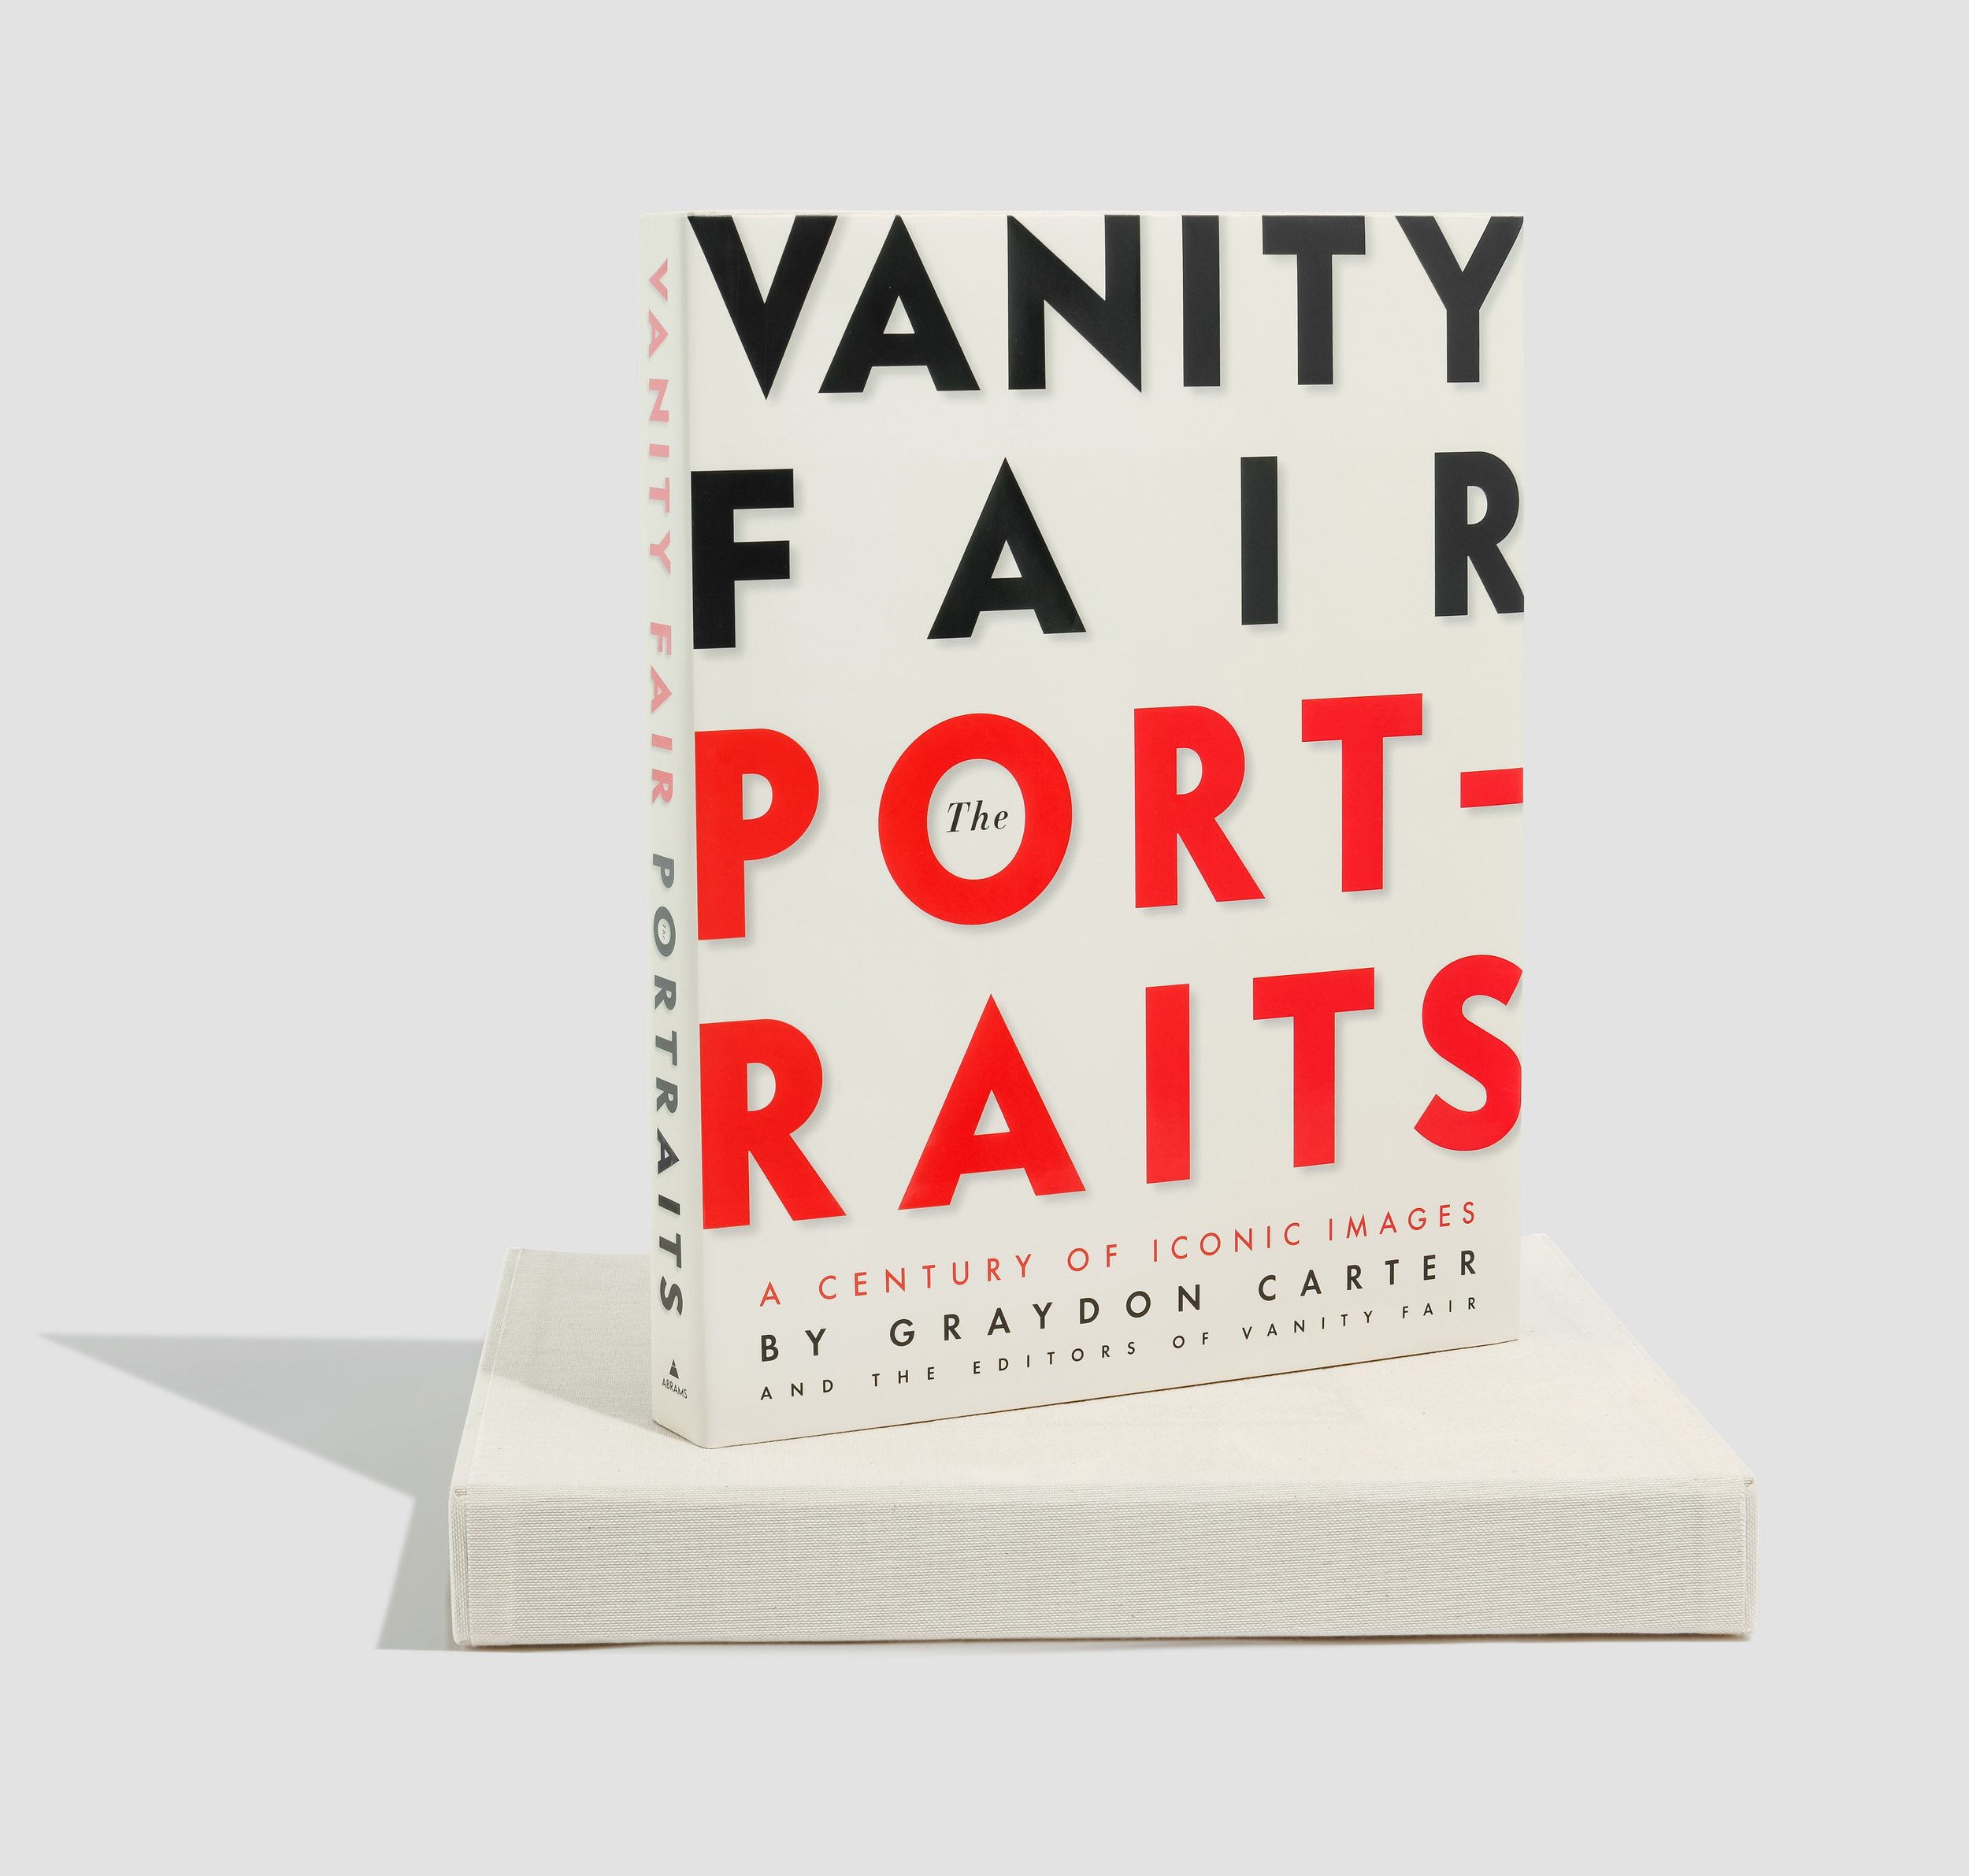 VANITY FAIR PORTRAITS by Abrams - photo by Andrew Werner, AWP_3108.jpg